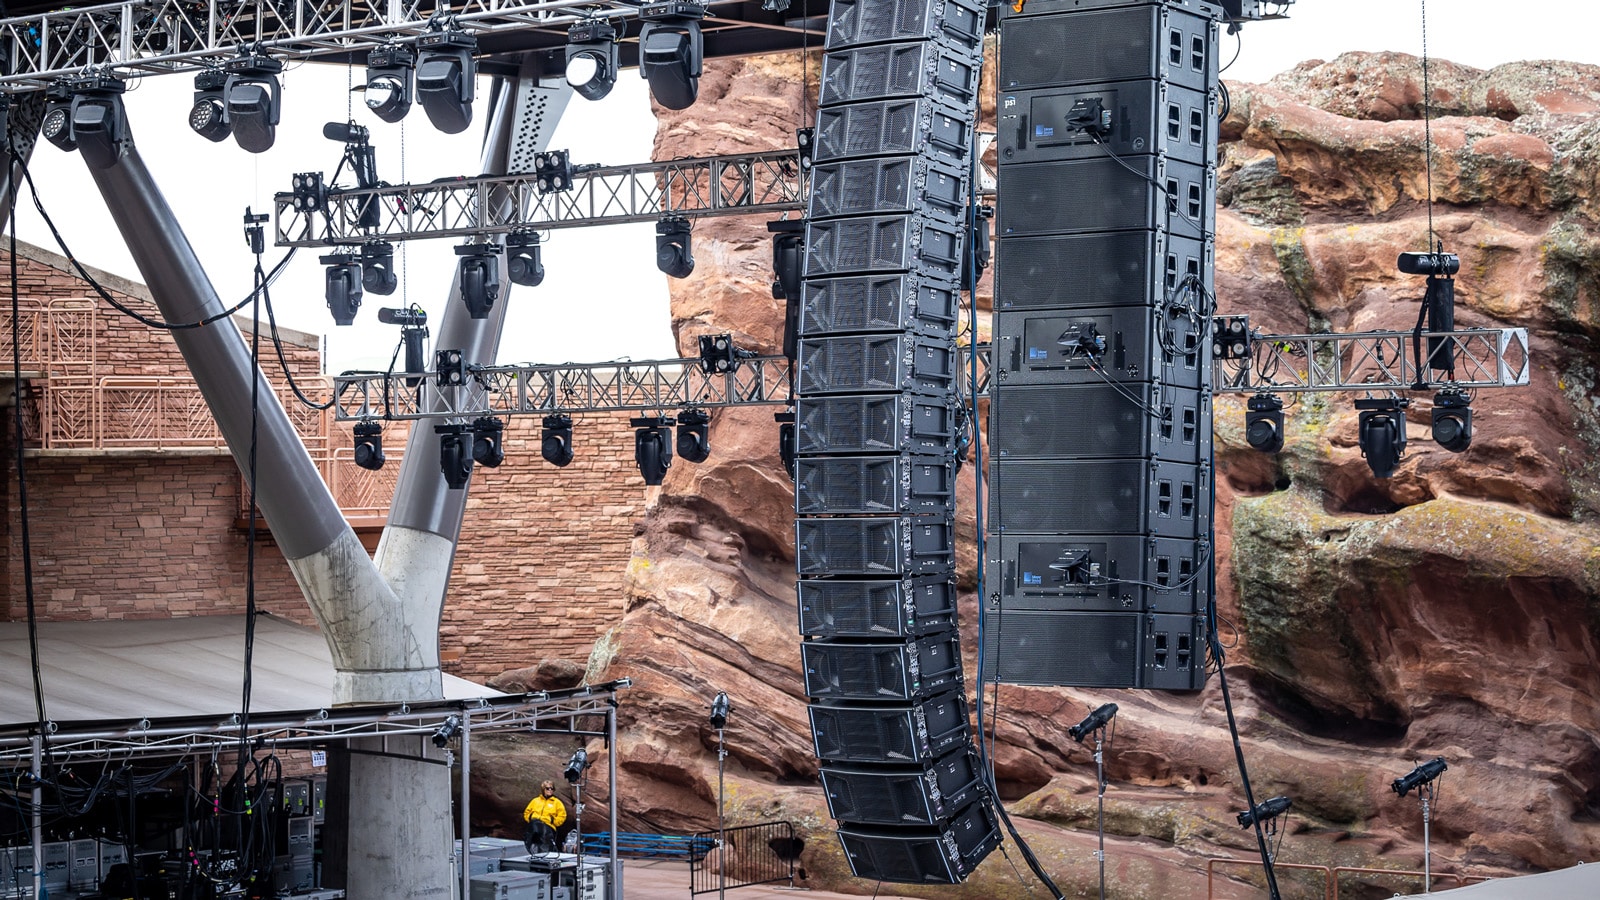 PANTHER Makes Red Rocks Debut with Joe Russo's Almost Dead